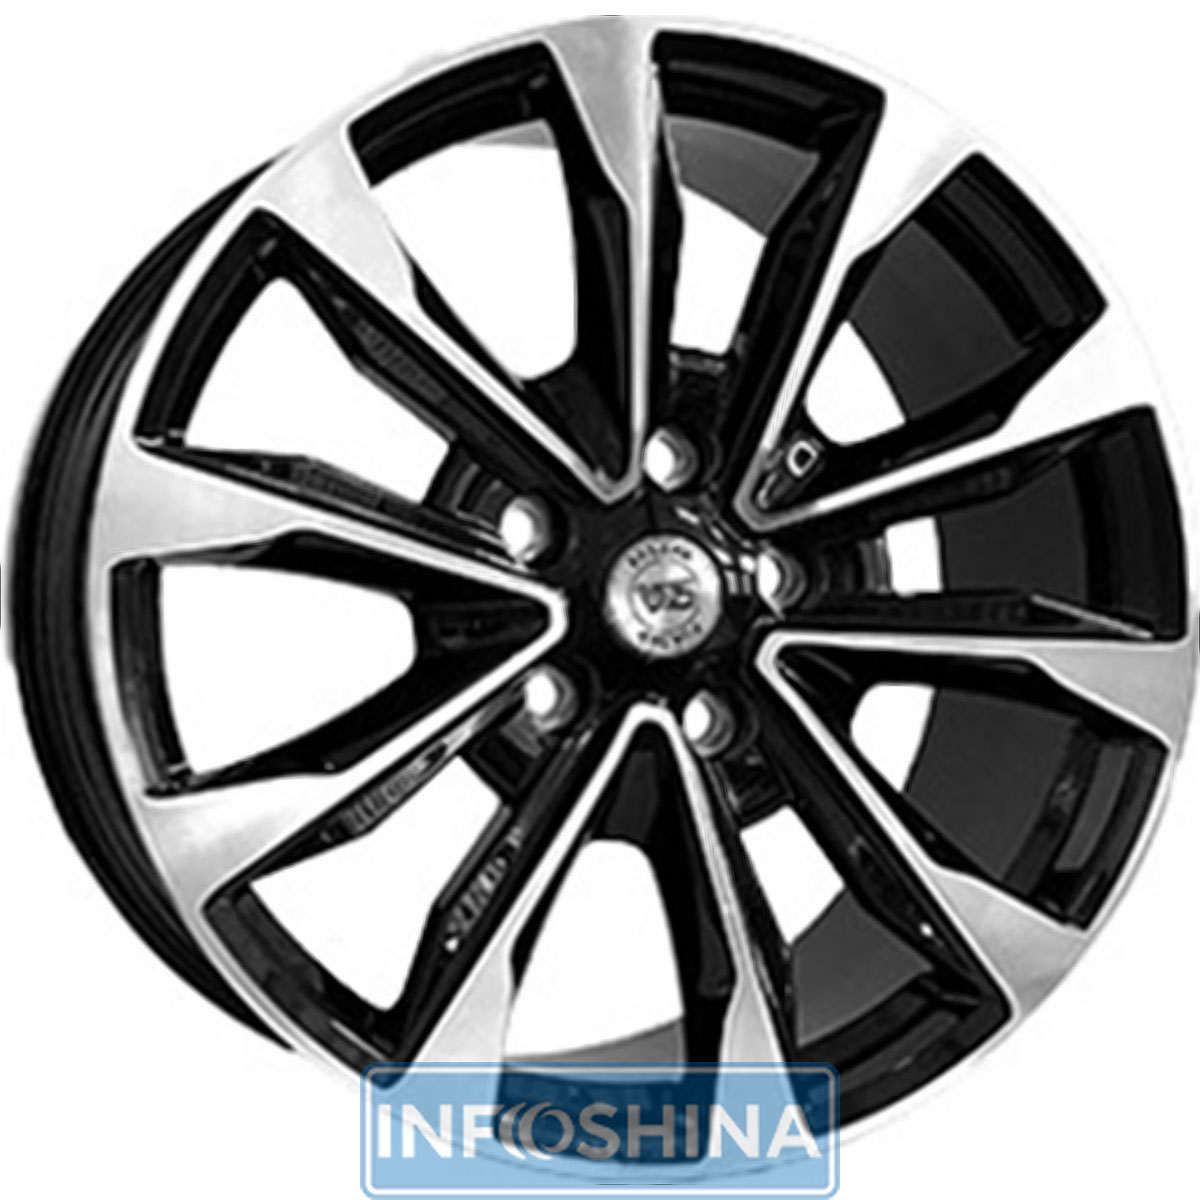 Купити диски WS Forged WS2155 Gloss Black With Machined Face R22 W9 PCD5x150 ET50 DIA110.1